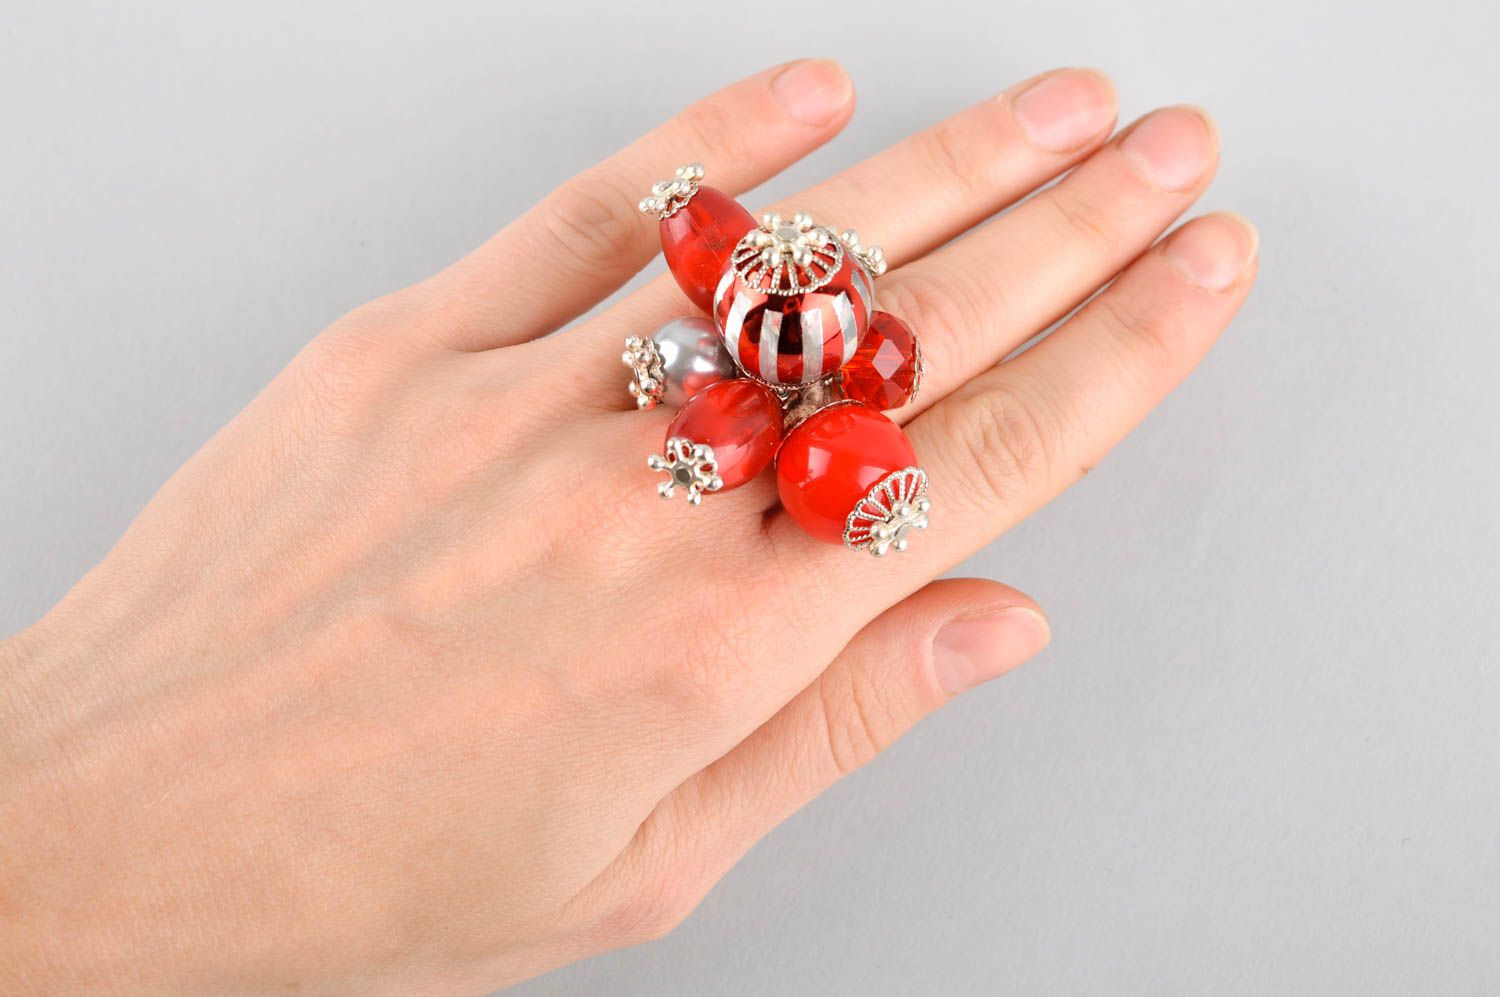 Handmade seal ring fashion ring beaded jewelry designer accessories gift ideas photo 5